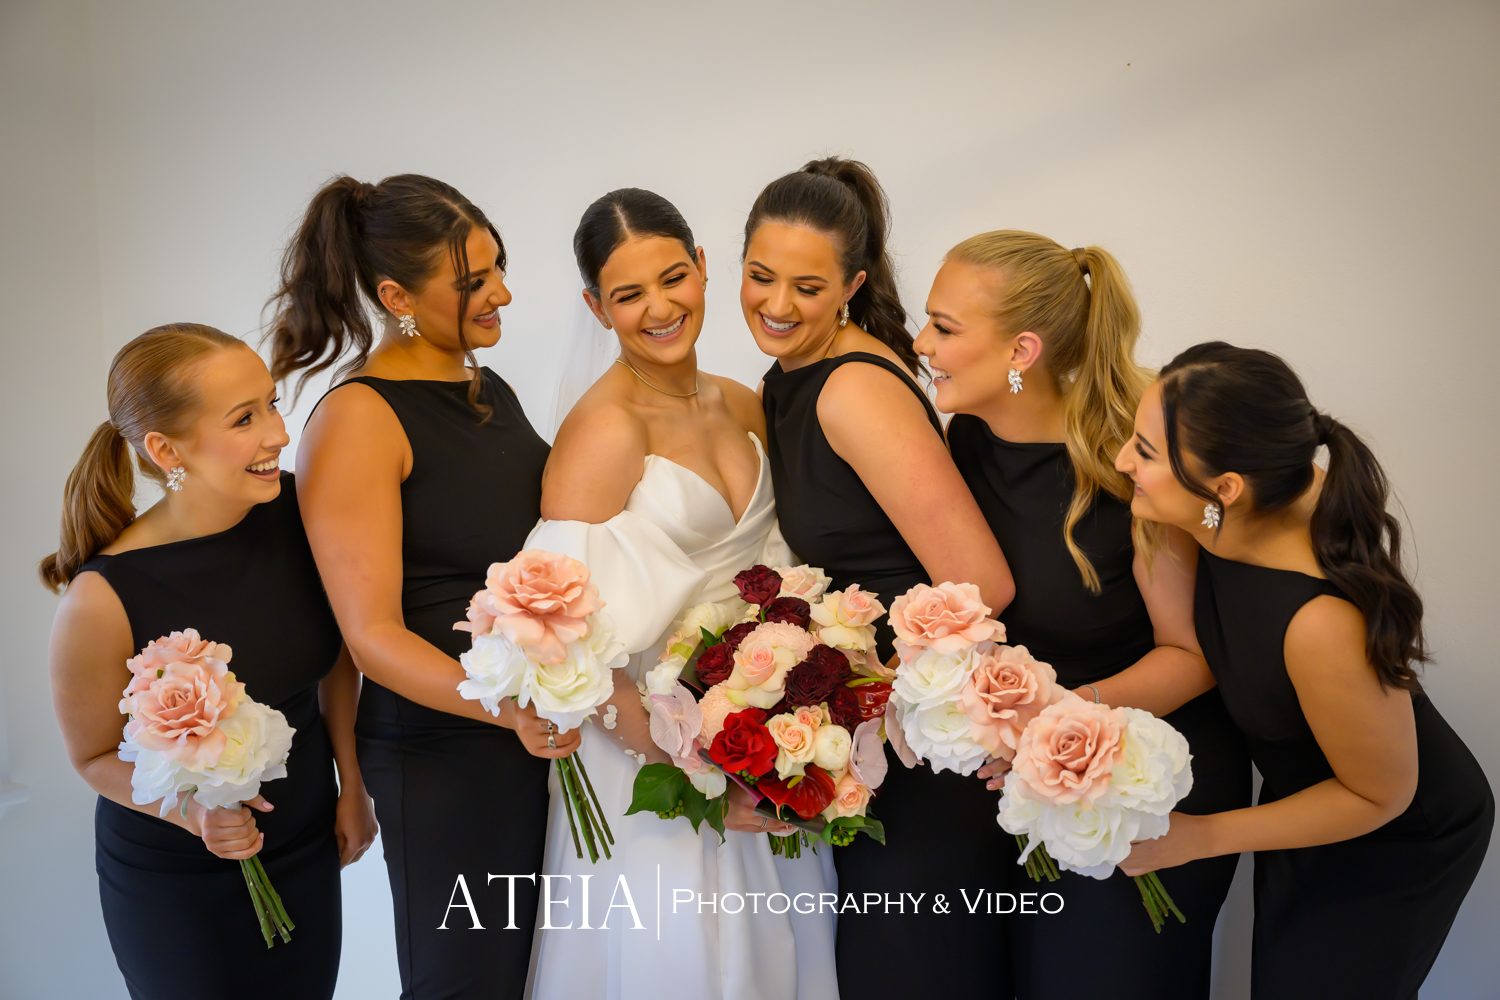 , Madeleine and Nathan&#8217;s wedding photography at Carousel Albert Park captured by ATEIA Photography &#038; Video